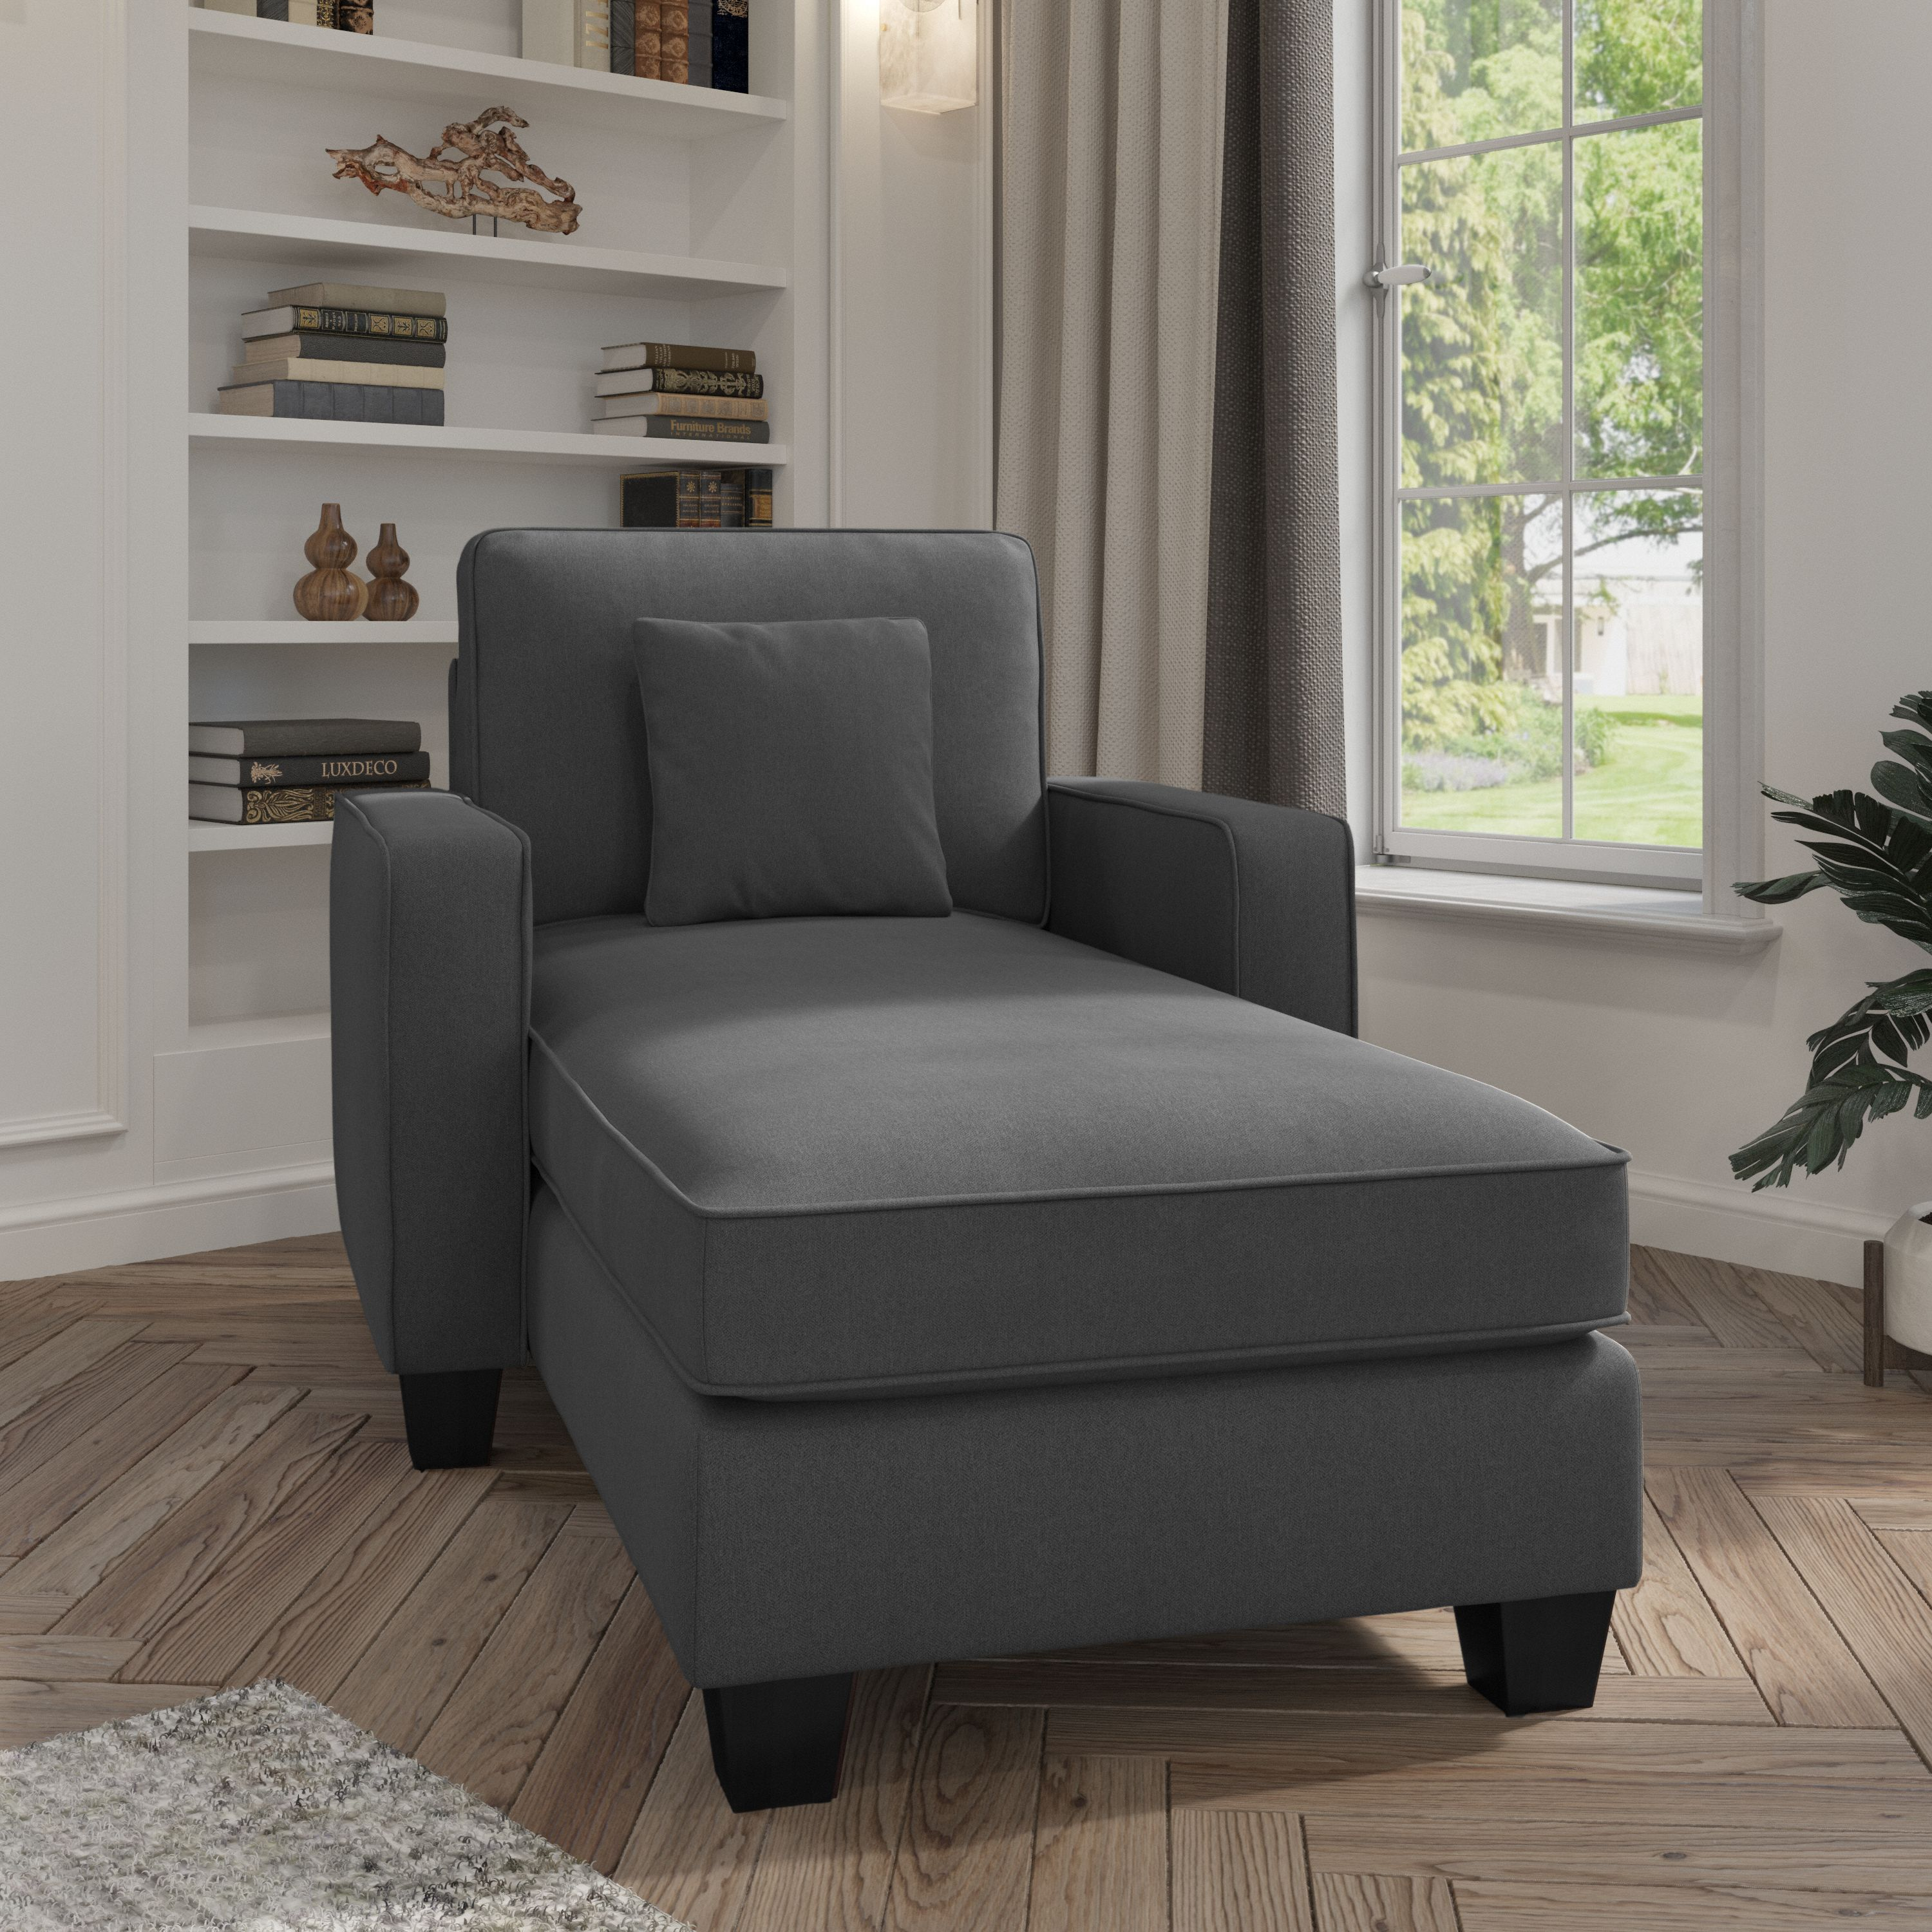 Shop Bush Furniture Stockton Chaise Lounge with Arms 01 SNM41SCGH-03K #color_charcoal gray herringbone fabr